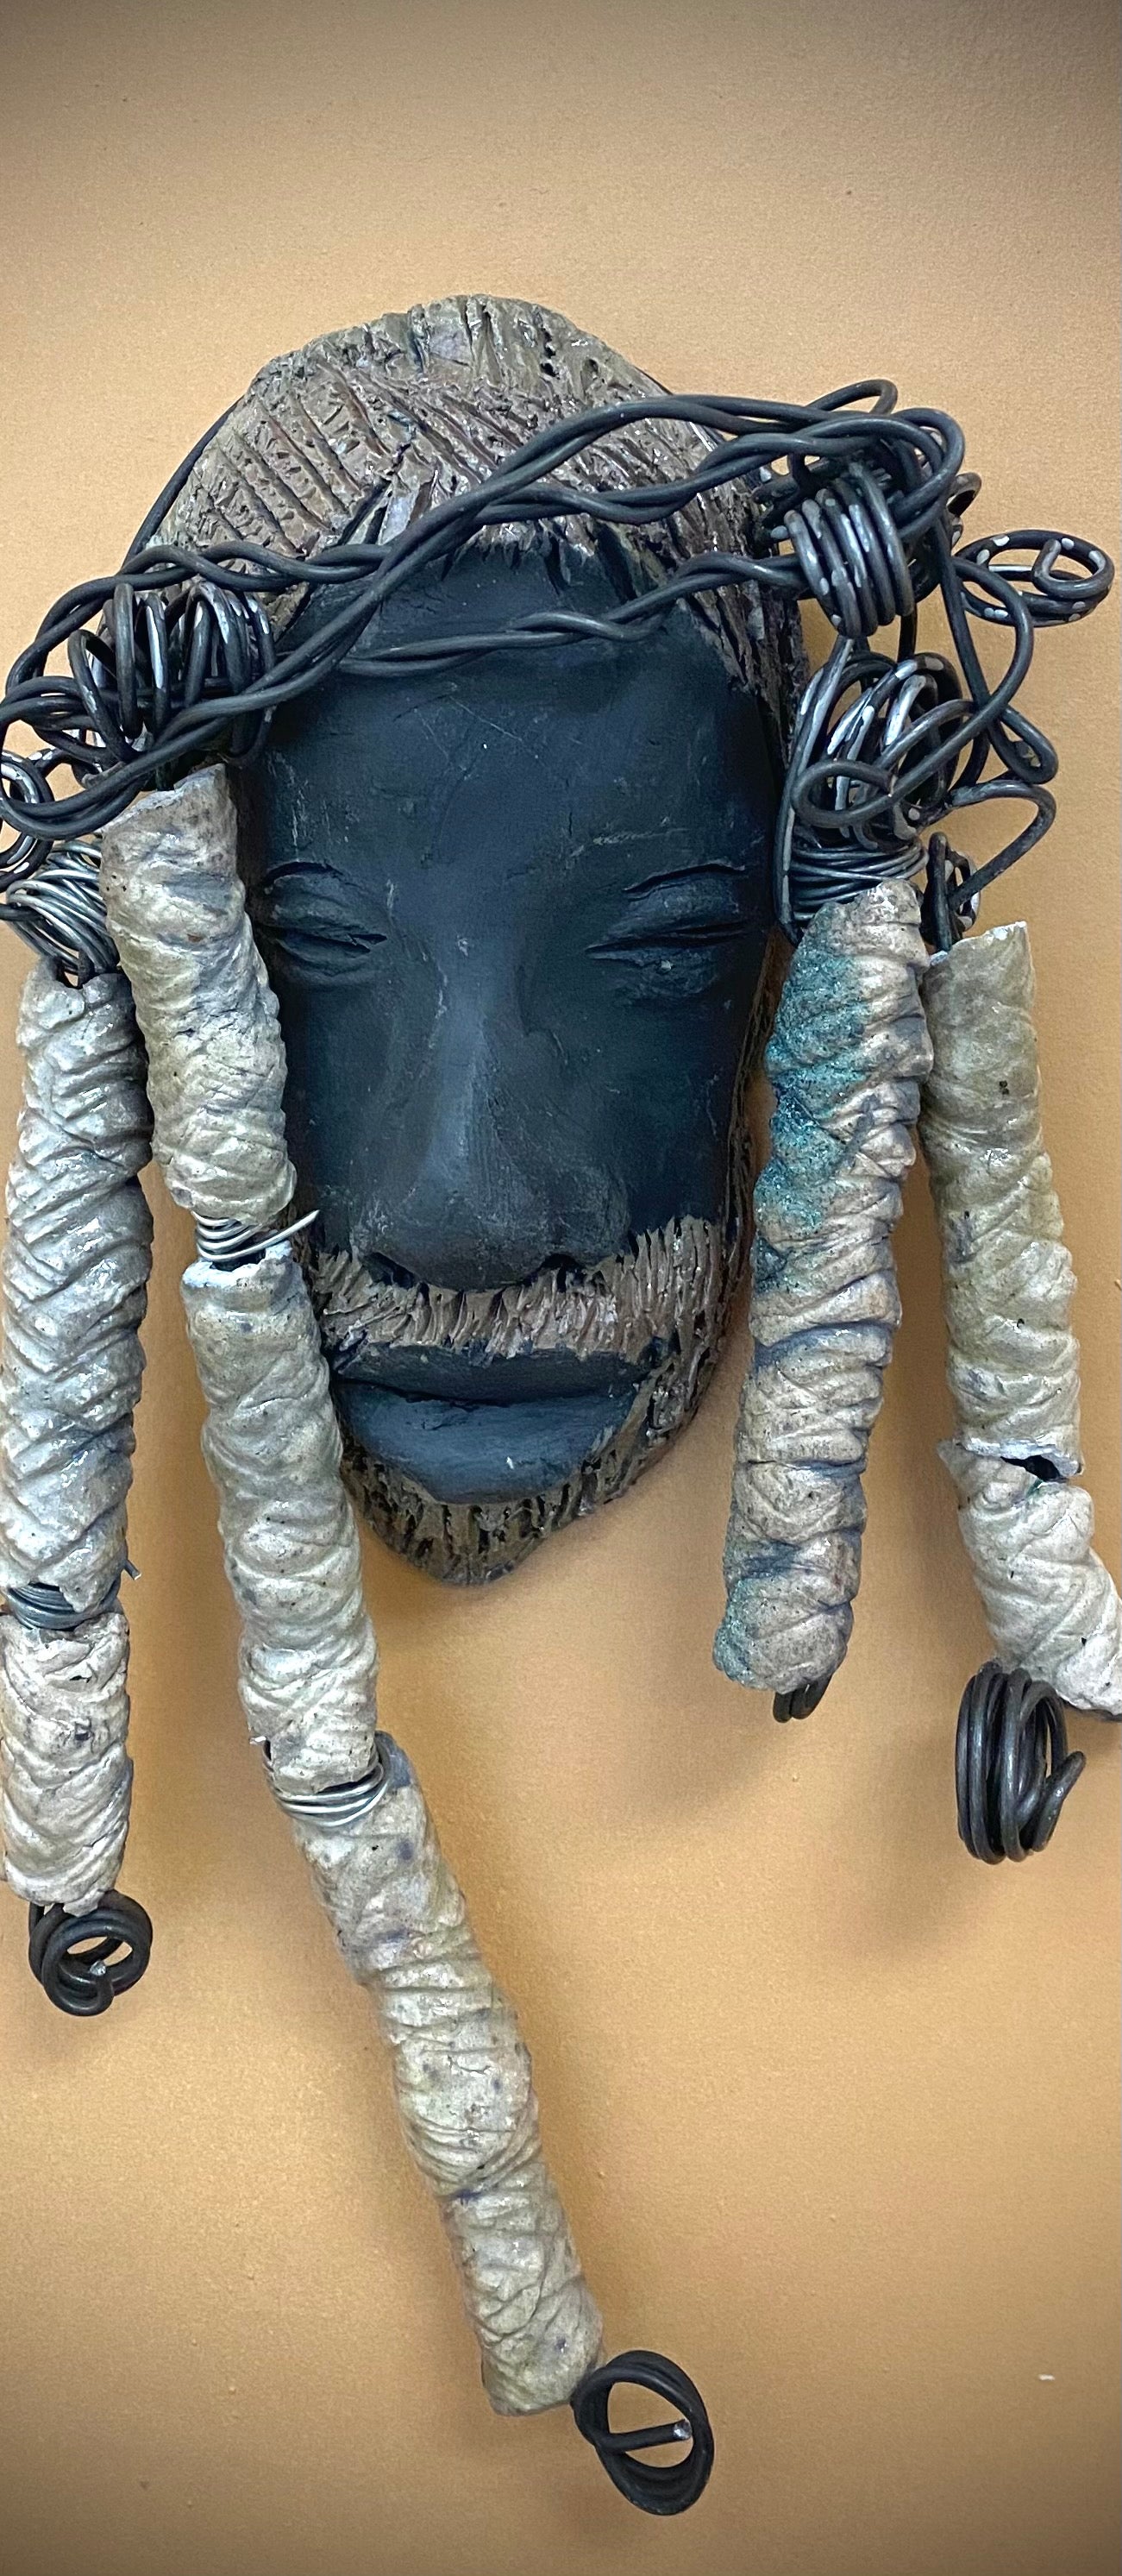 Meet Afumba! I started making art soon after seeing authentic African artwork at the Smithsonian Museum of African Art. I was in total awe. Afumba was inspired by my visit there.   Afumba is a wise and distinguished  bearded gentleman who has a smoky dark complexion. He is approximately 8" x 4" and weighs 10 ozs. Afumba has an aged hairstyle of 10 handmade textured off white clay dreadlocks along with twist of coiled 16 gauge wire.